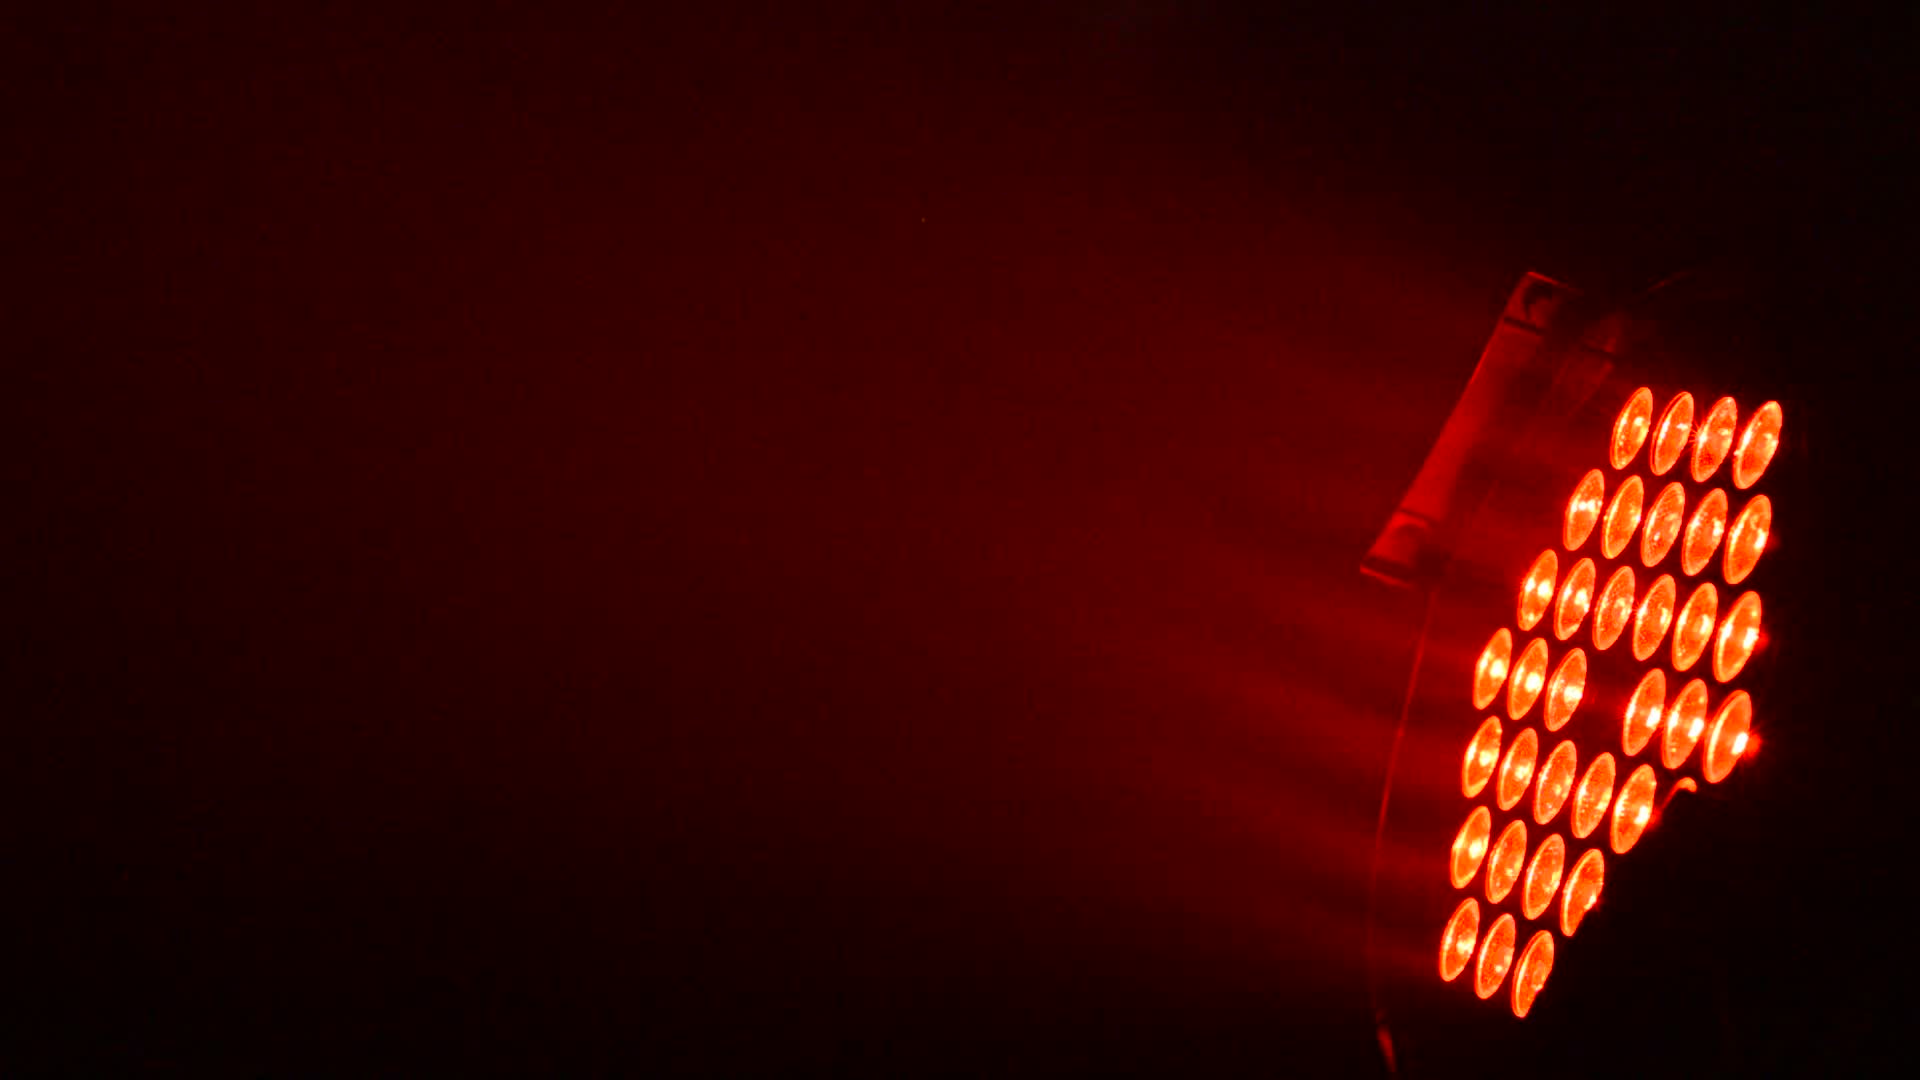 Red Led Lights Stage - HD Wallpaper 